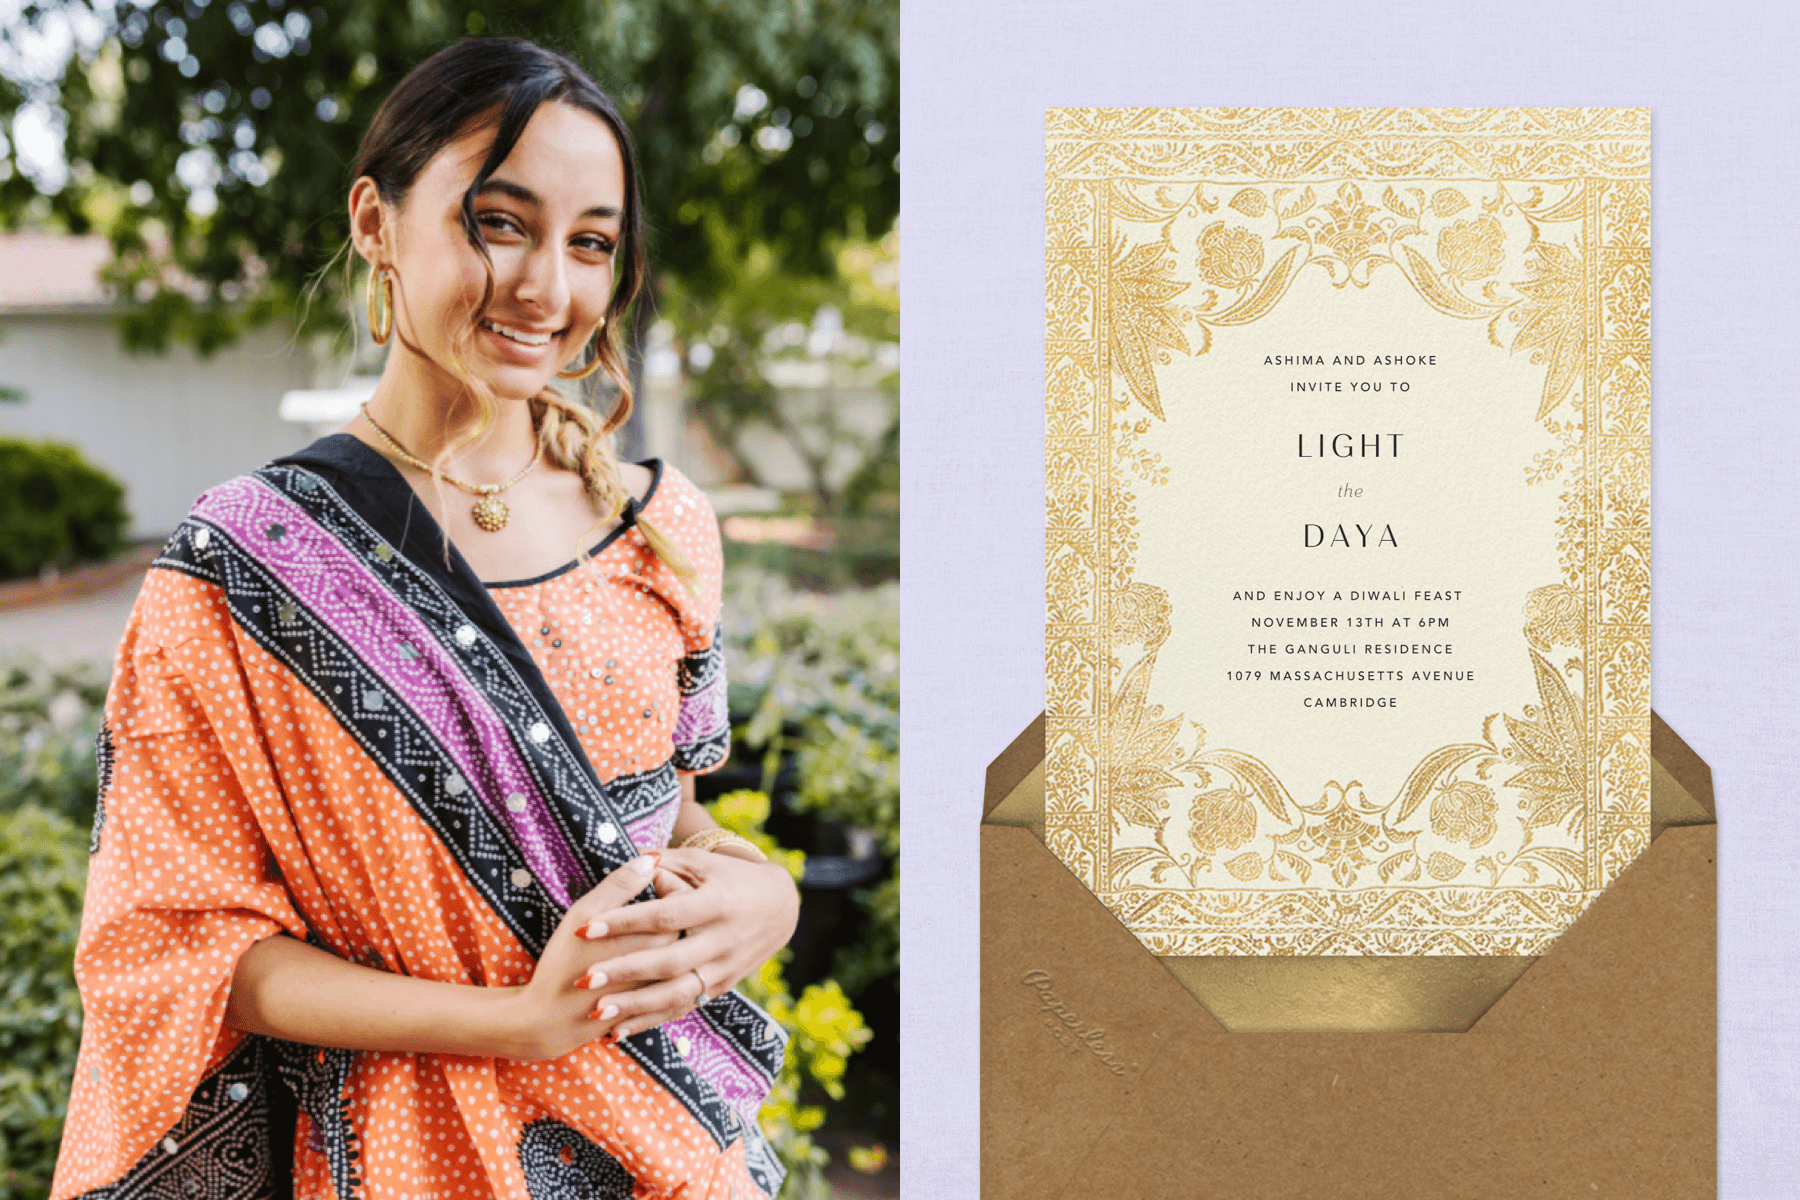 Left: A young woman dresses in a sari for Diwali. Right: A floral gold Diwali invitation.